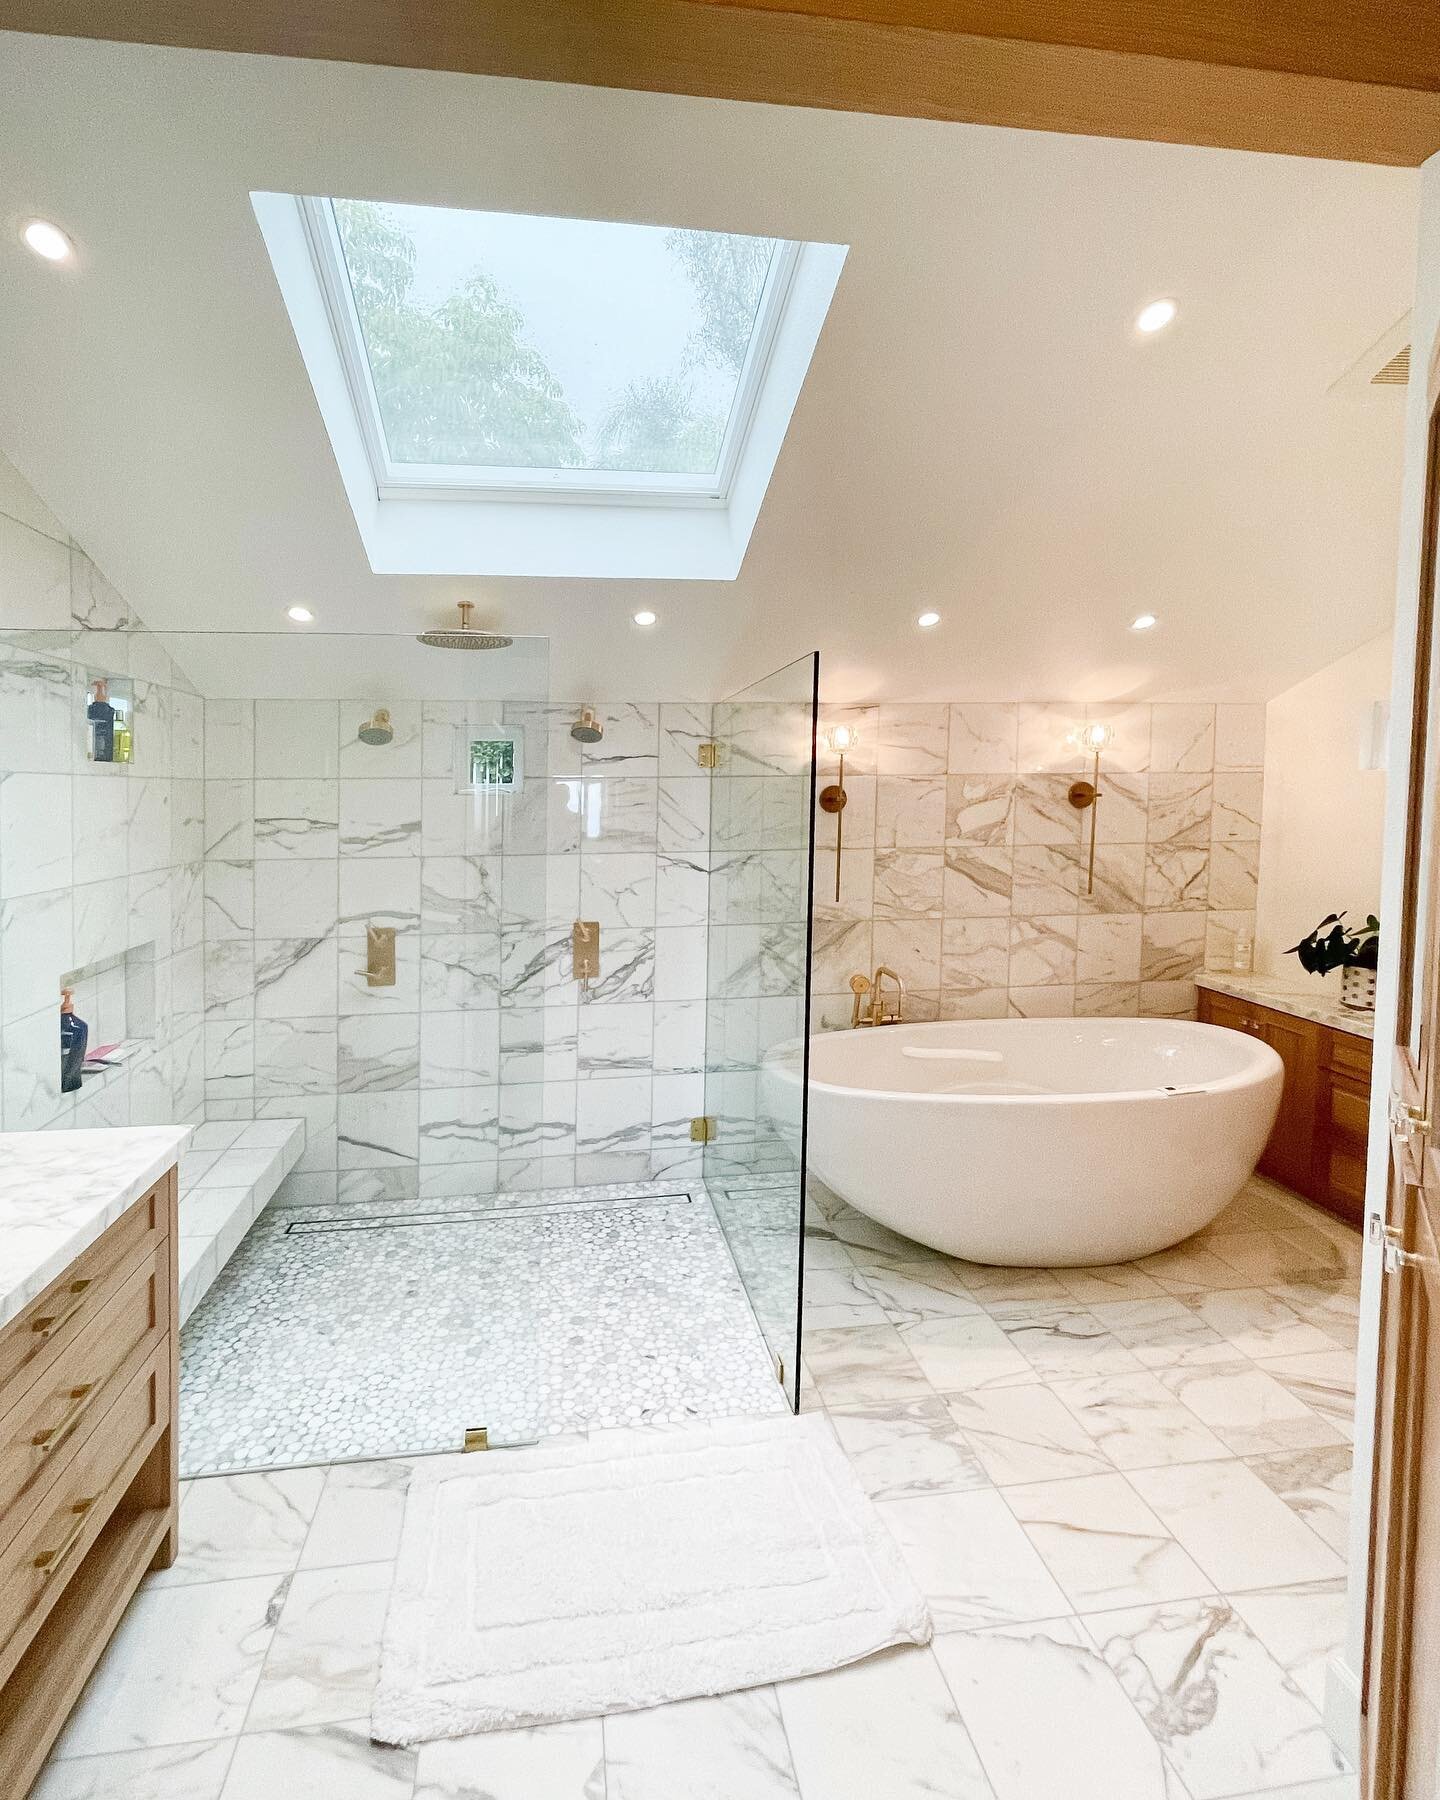 Did you know we do remodels? Check out our latest master bath remodel! We turned this dated master bath into a updated light and bright masterpiece. Who needs a spa when your bathroom looks like this? (Swipe for before and after pics) #masterbath #mo